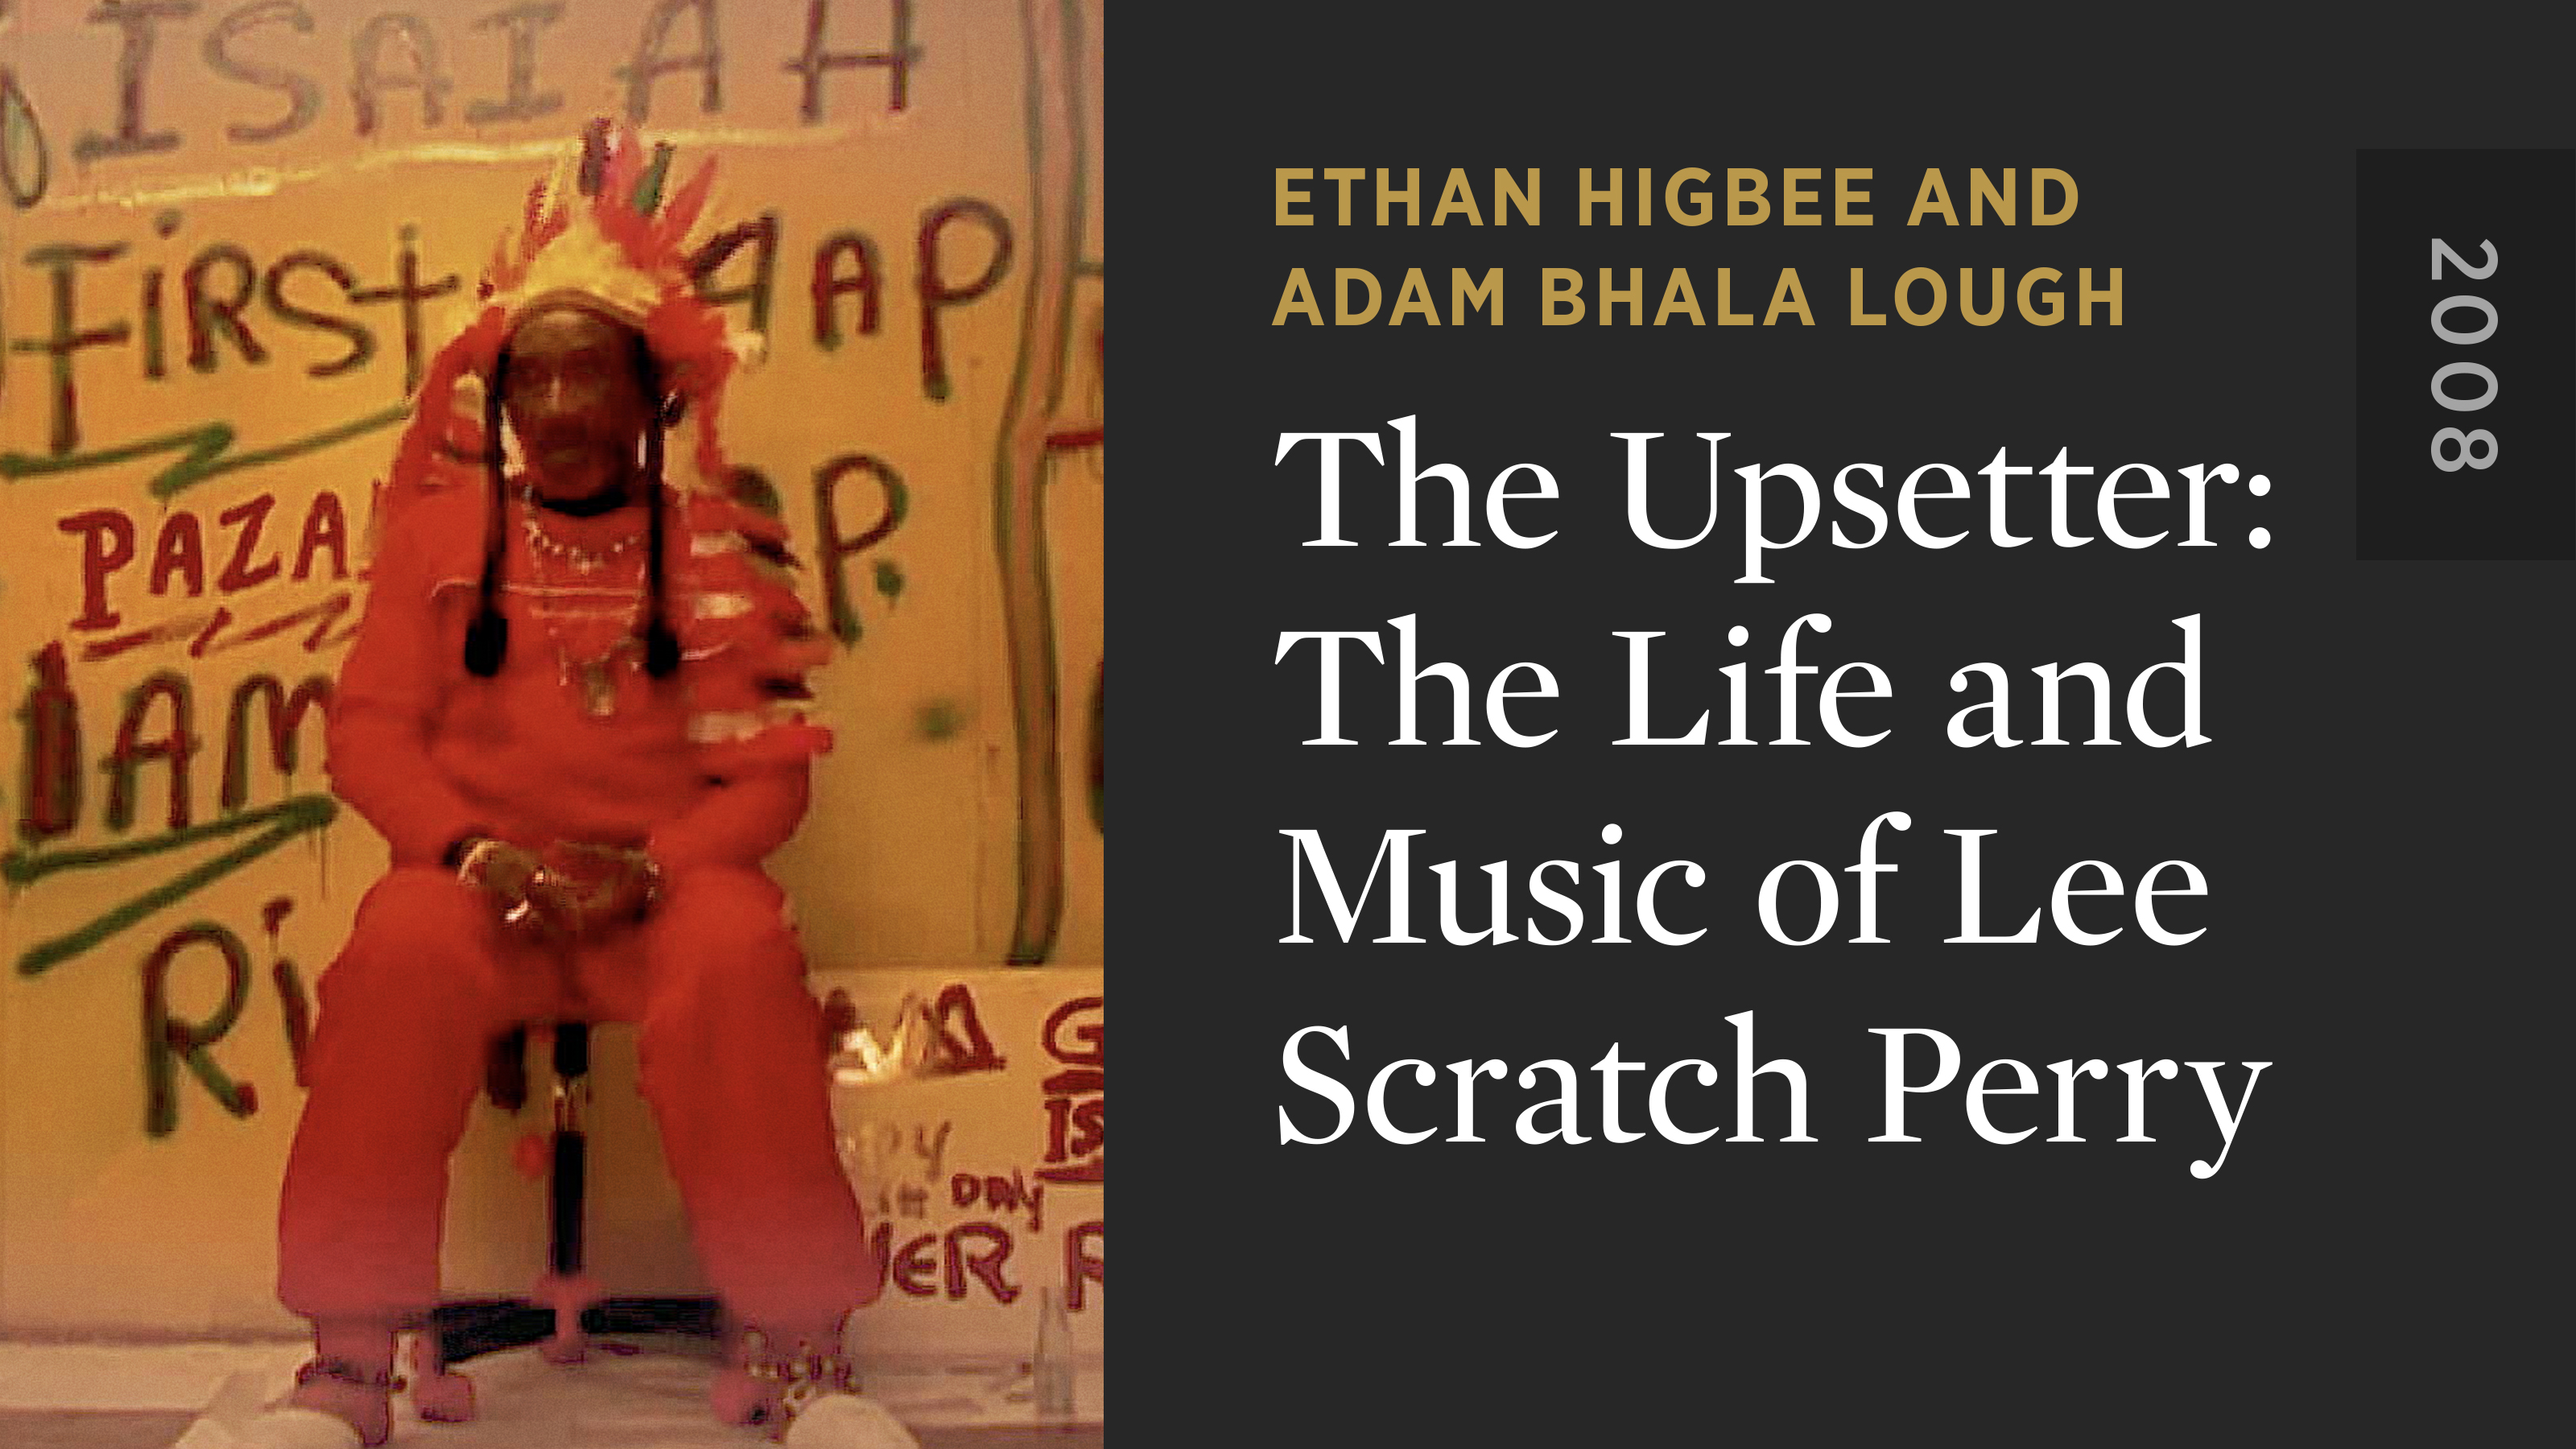 The Upsetter: The Life and Music of Lee Scratch Perry - The